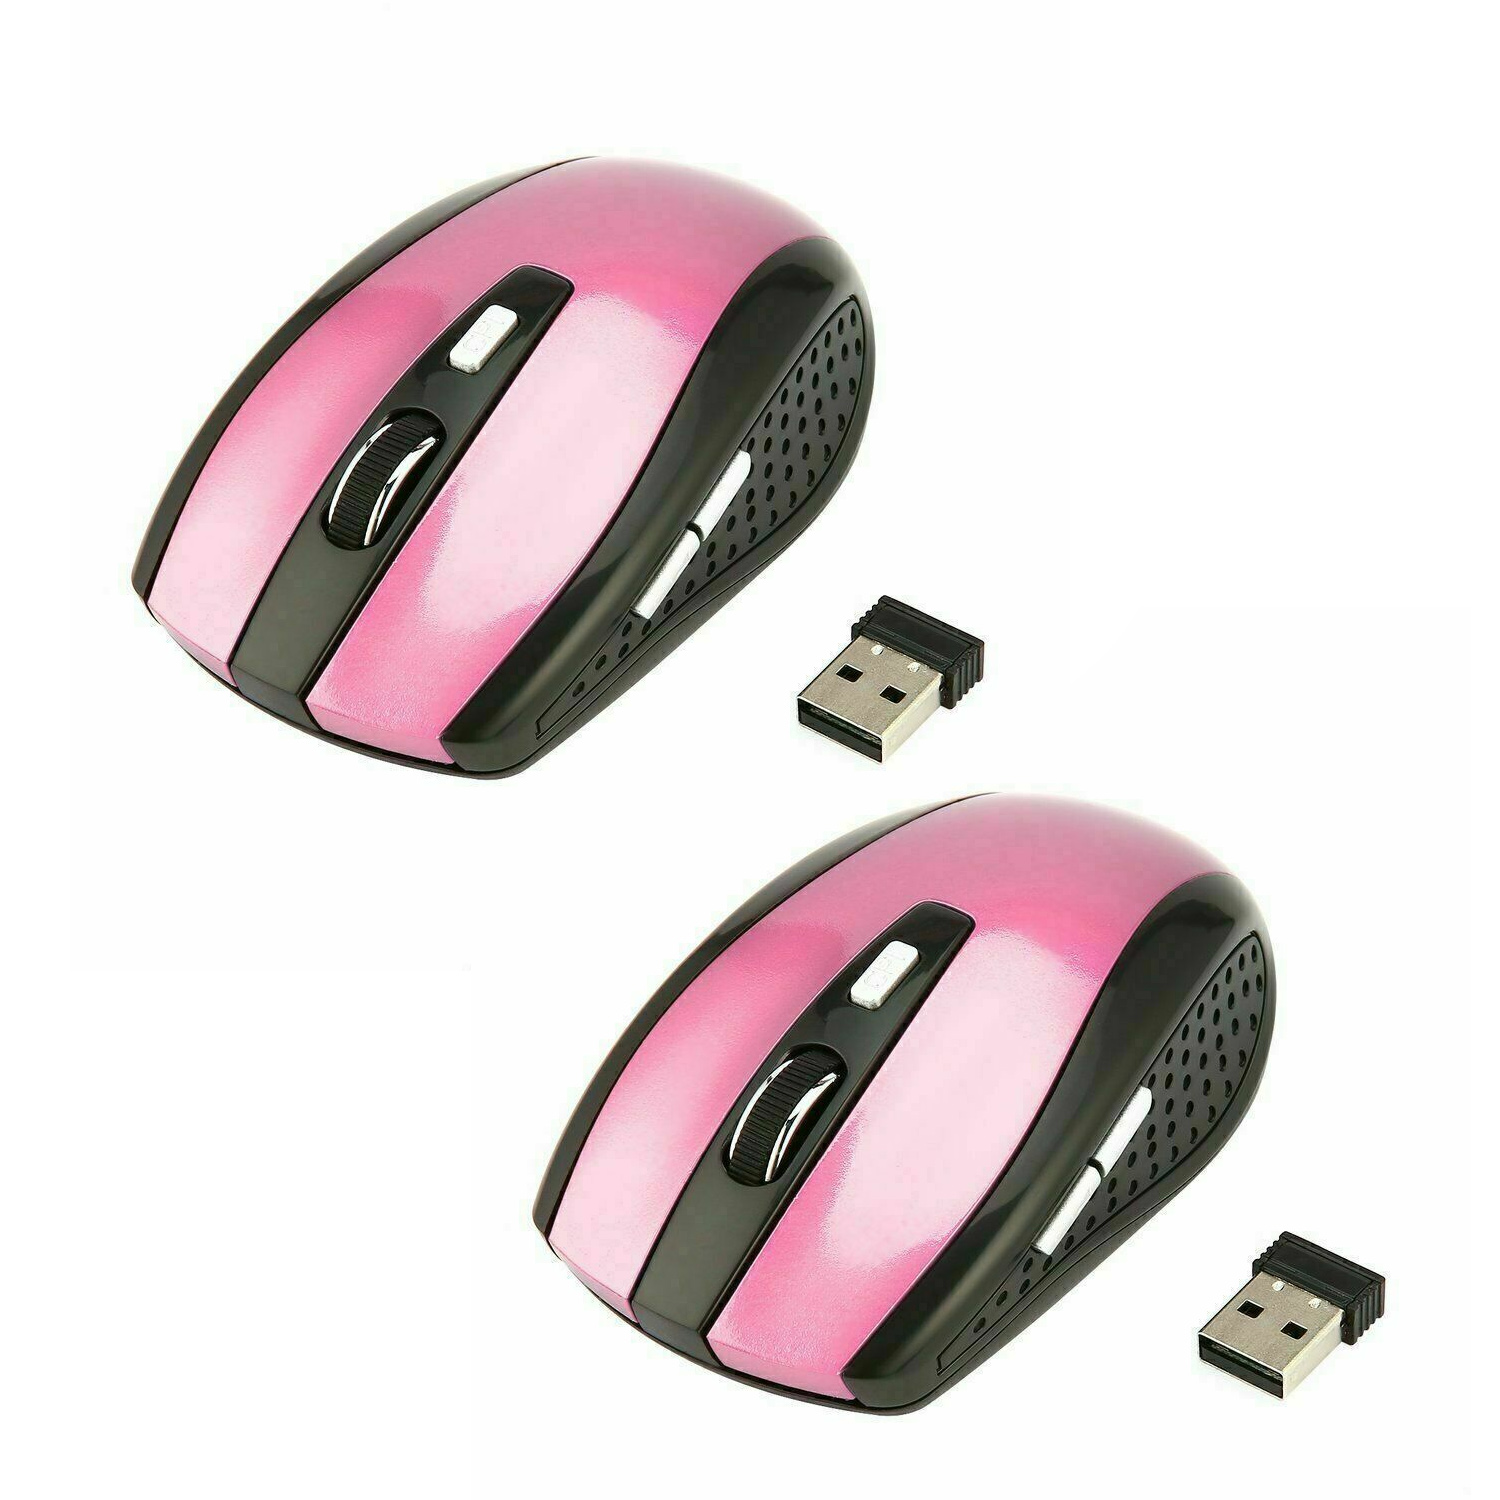 2Pcs Wireless Optical Pink Mouse Mice & USB Receiver For PC Laptop Computer DPI Black - image 1 of 7